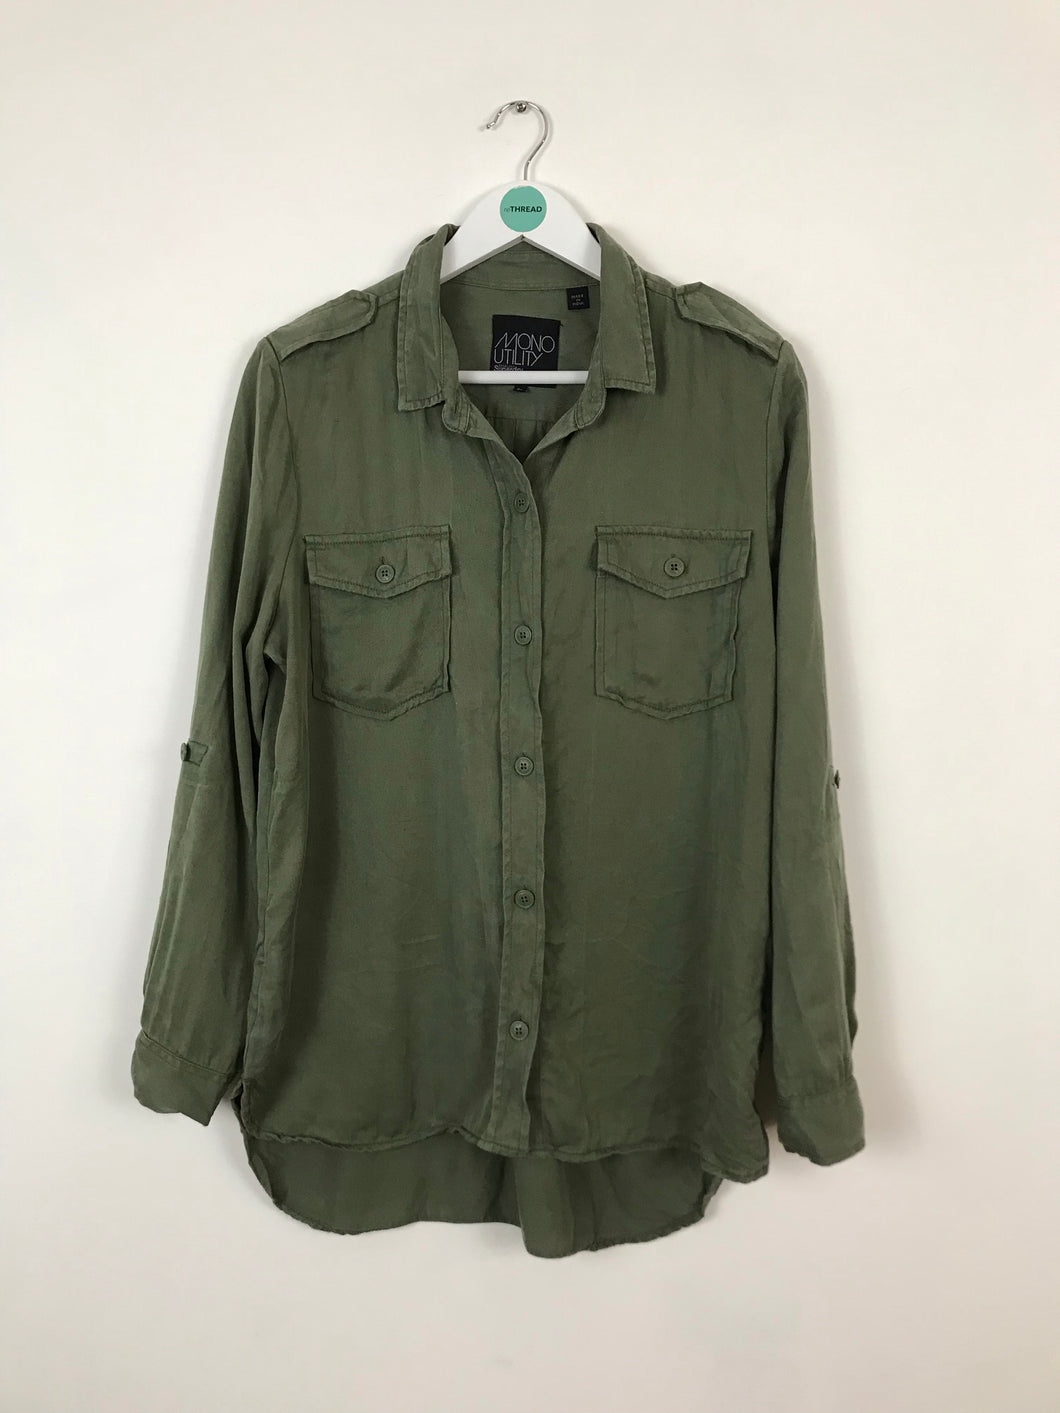 Superdry Oversized Military Style Shirt | L UK12-14 | Green